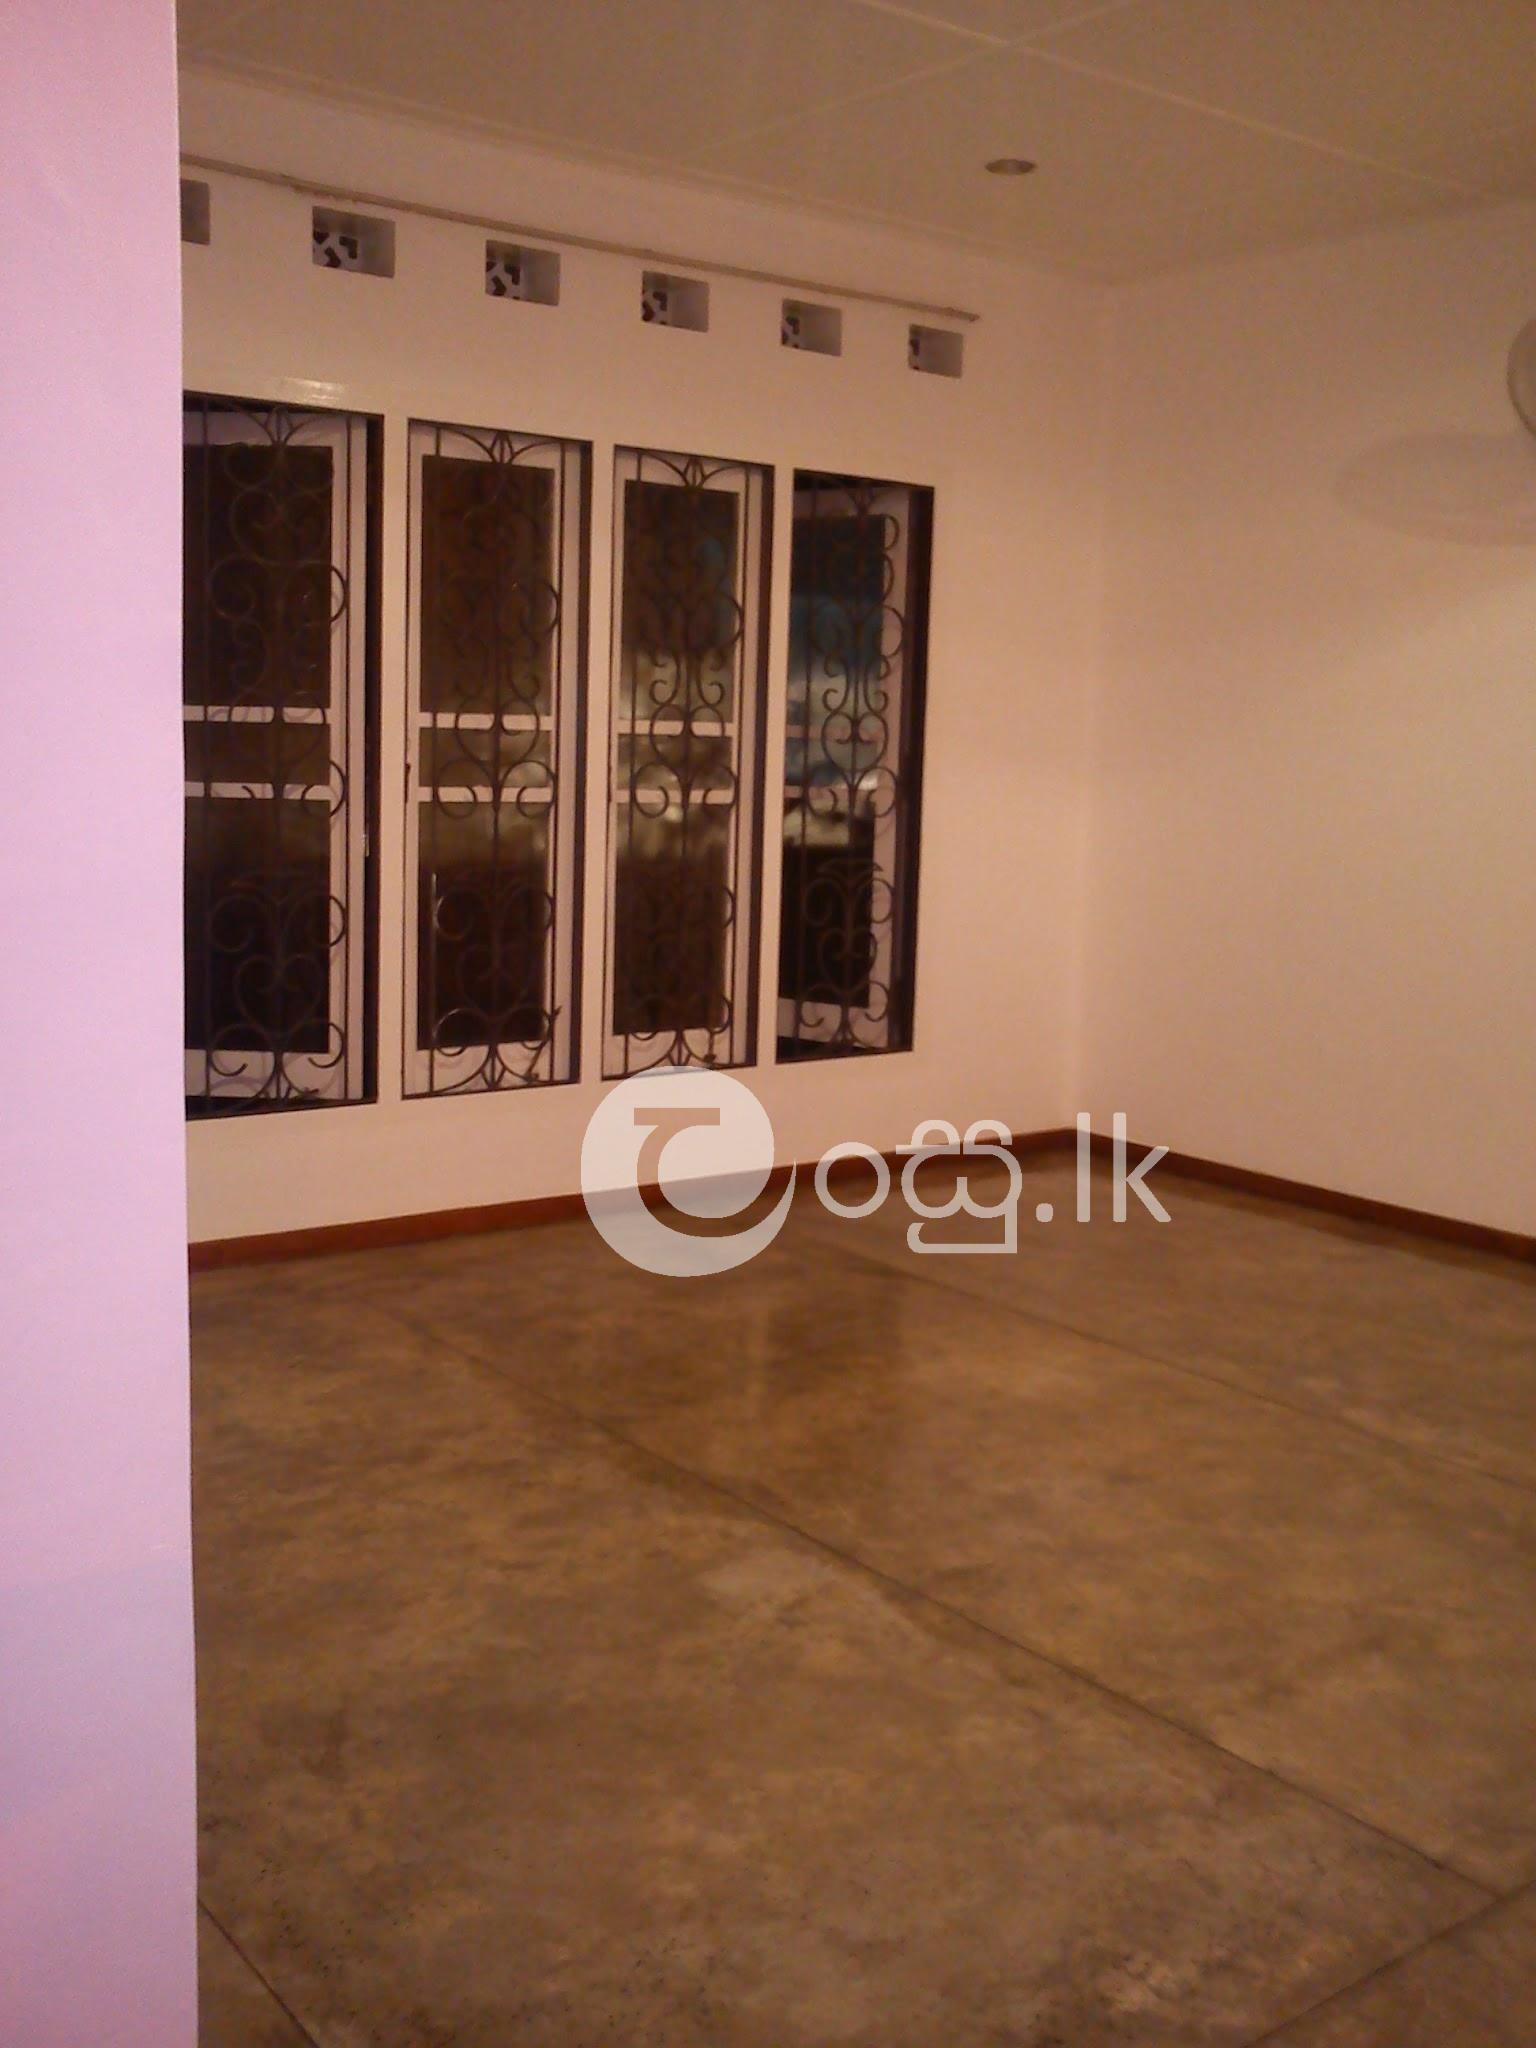 House for sale  Houses in Nugegoda